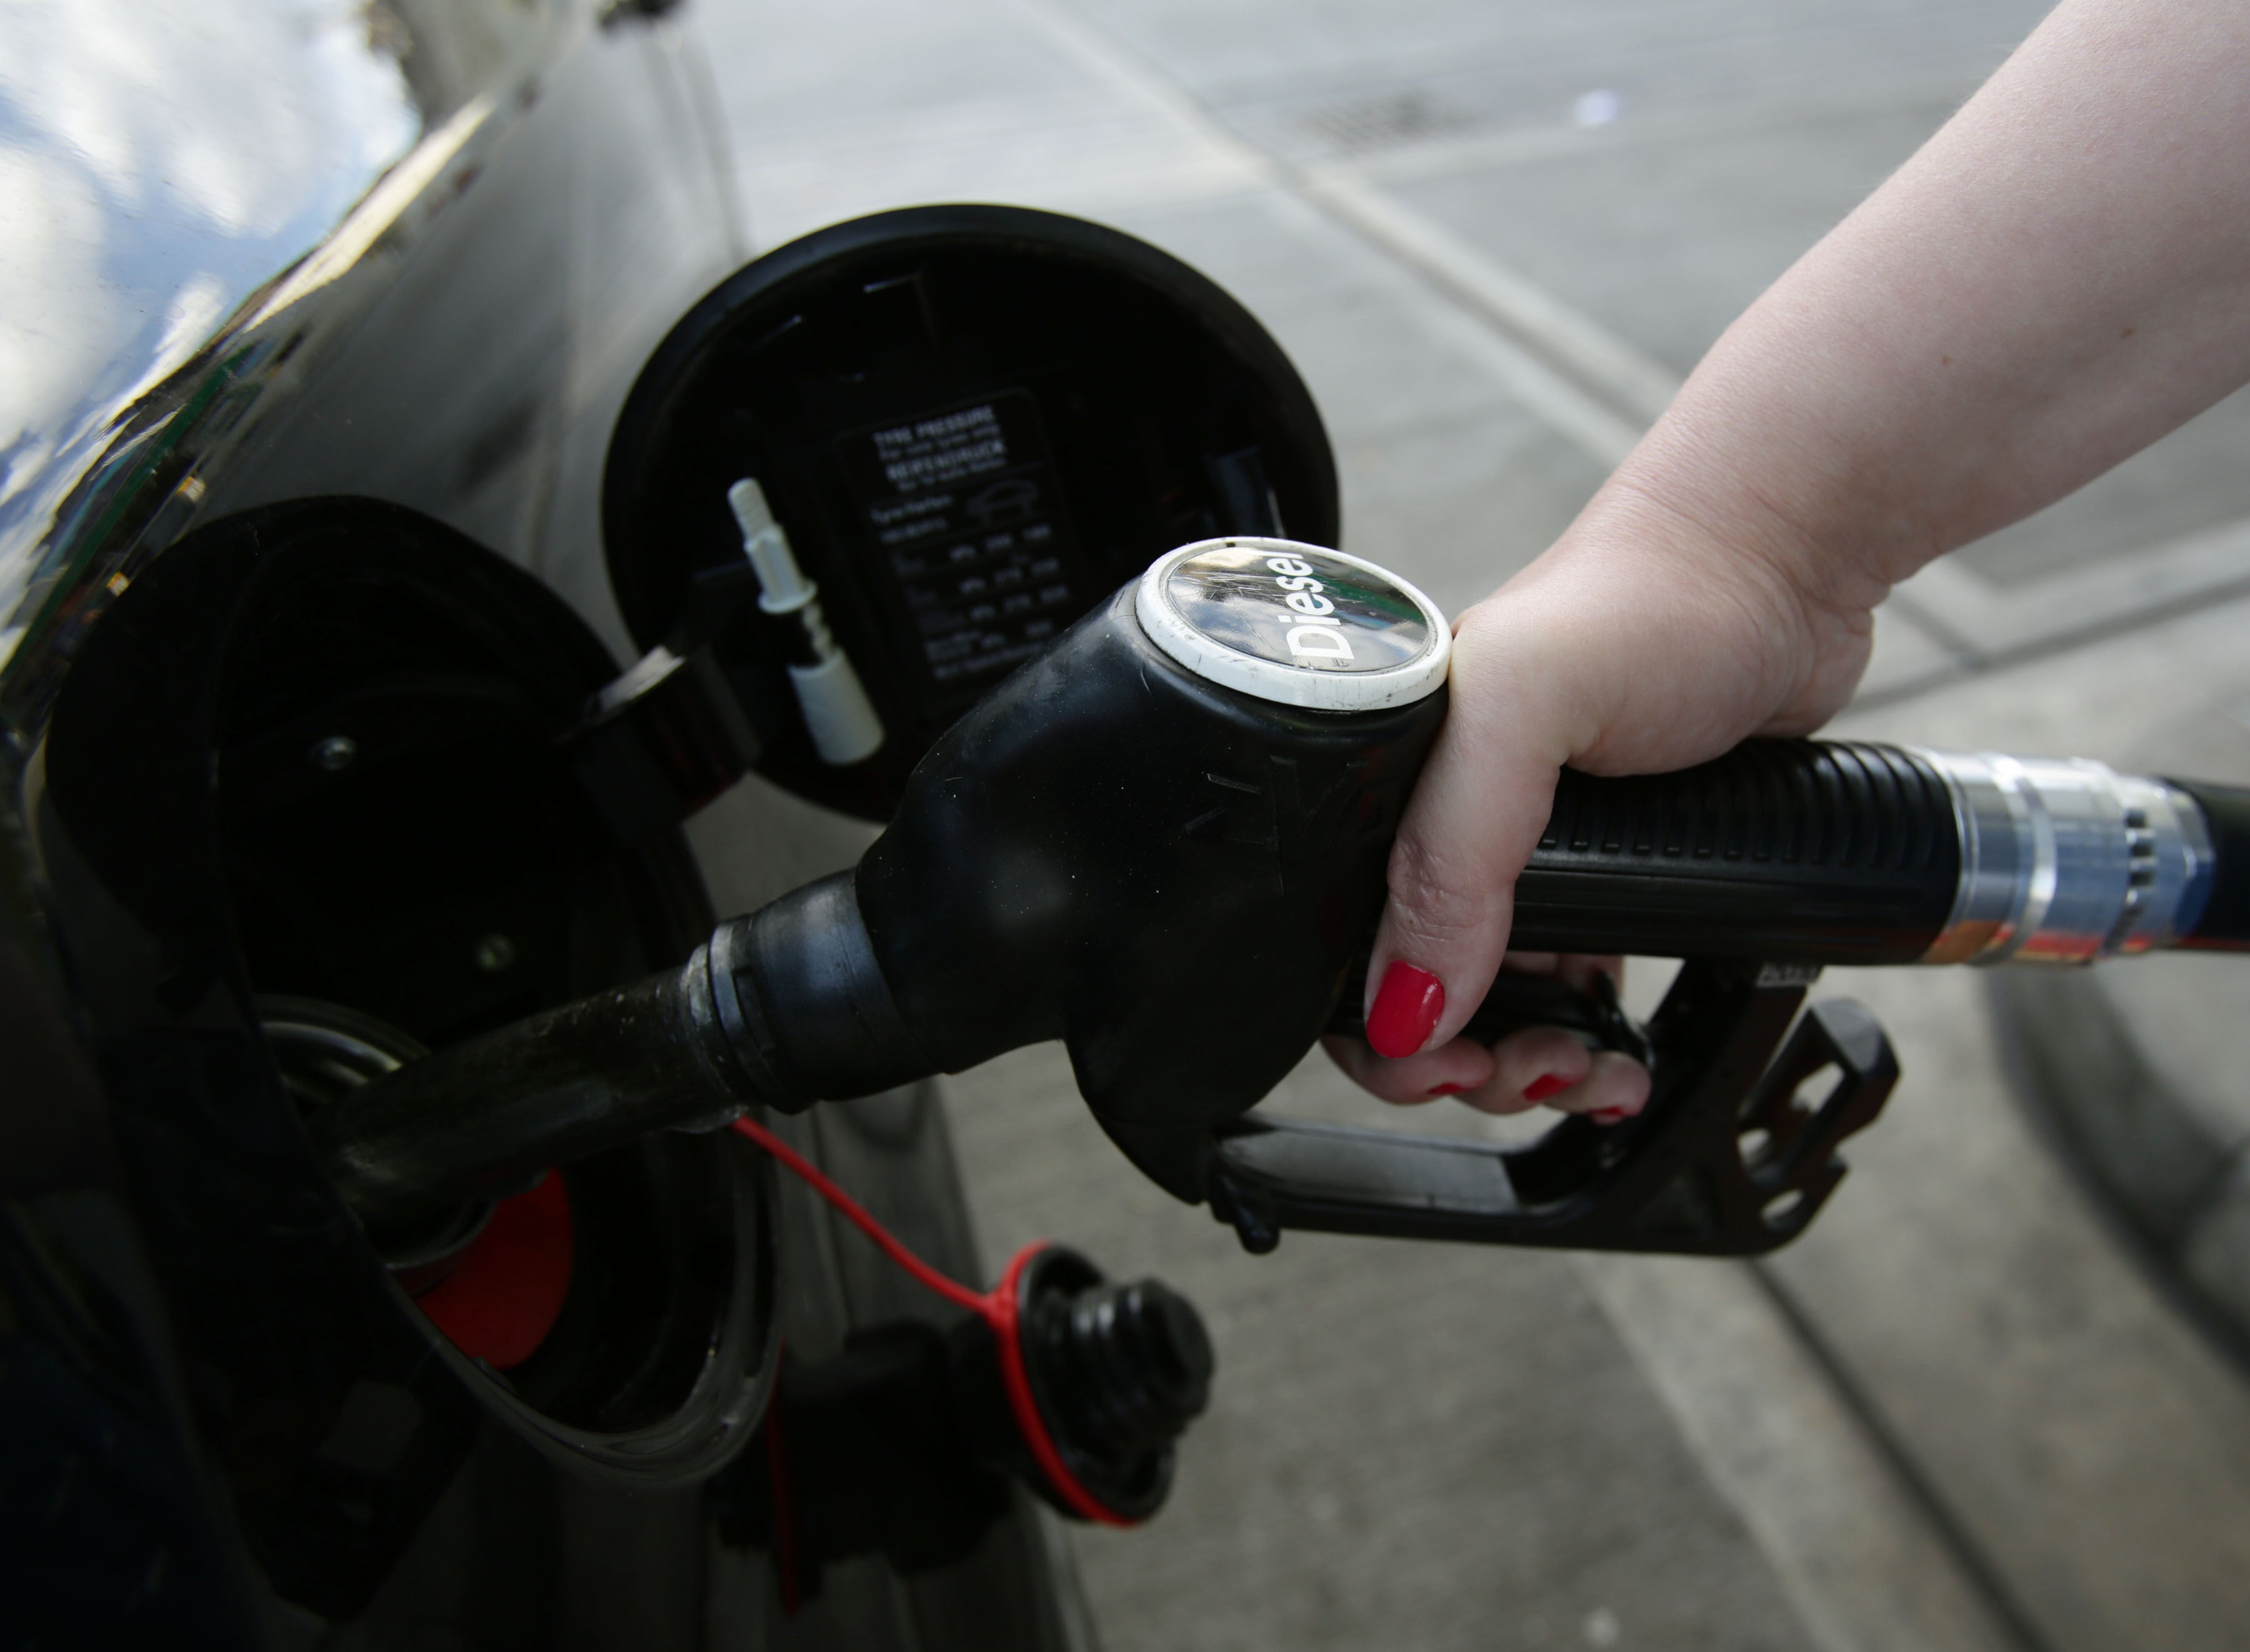 Until last month, the highest average price of diesel was 147.93p, recorded in April 2012